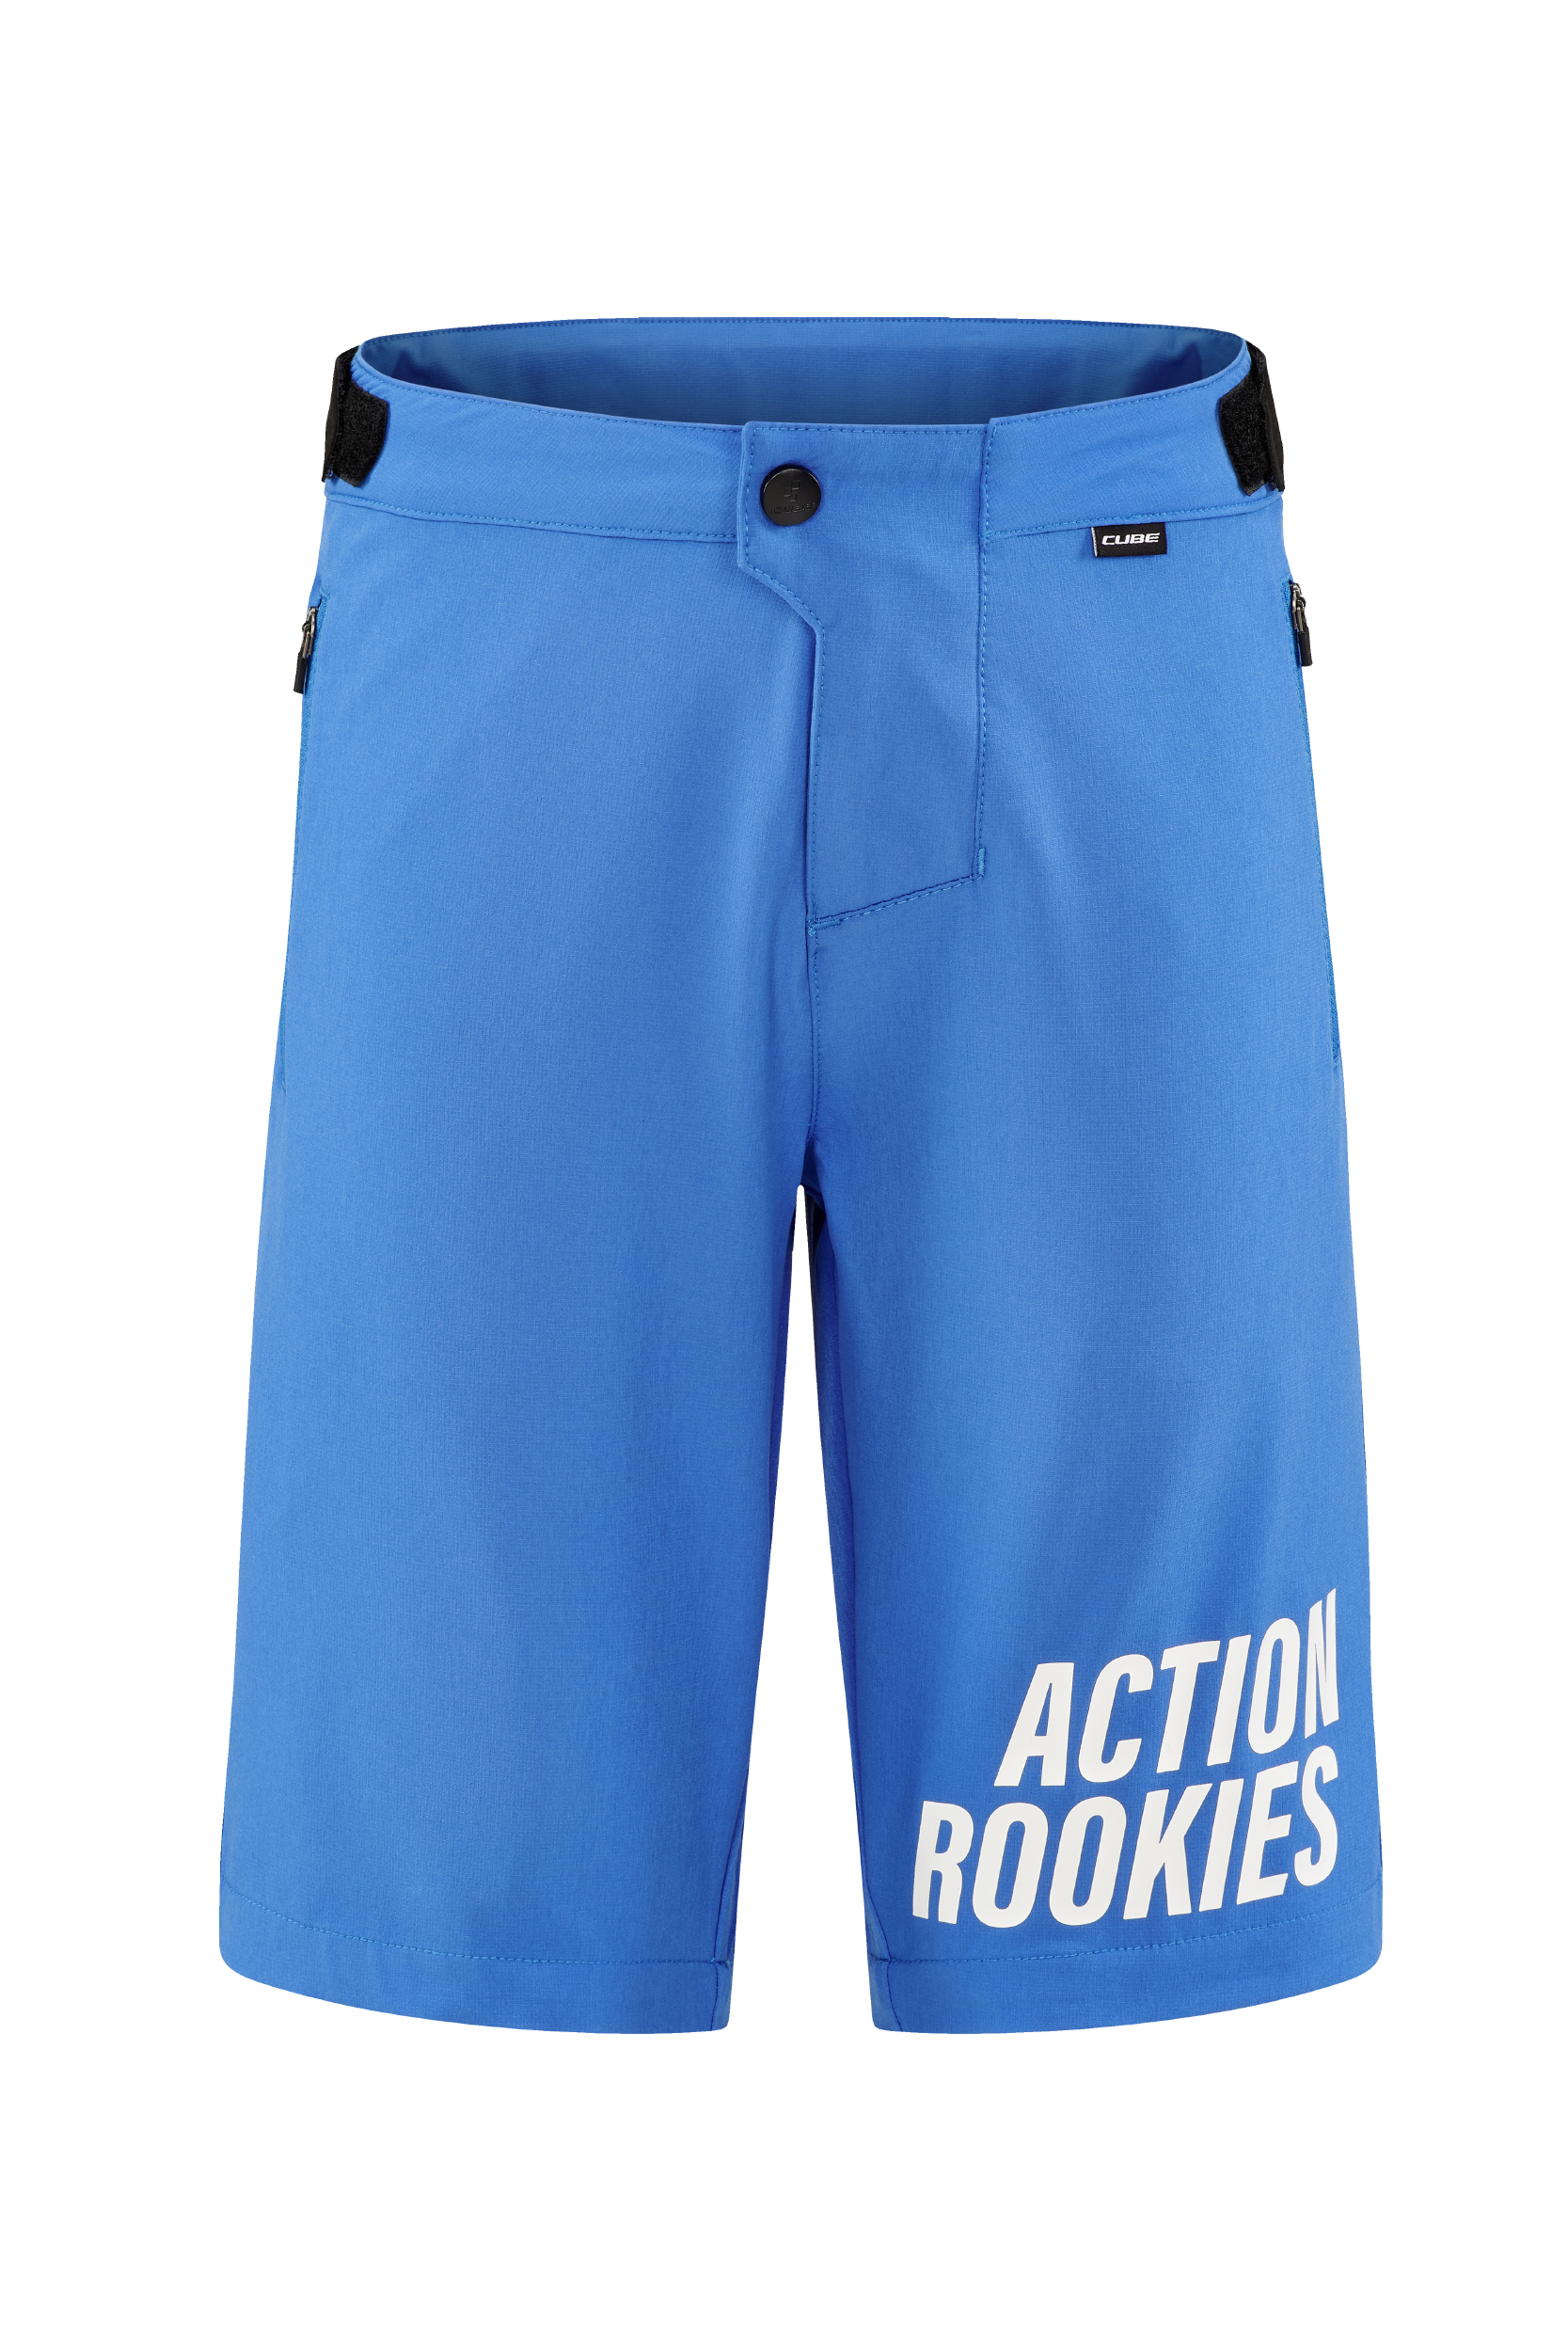 CUBE VERTEX Baggy Shorts ROOKIE X Actionteam